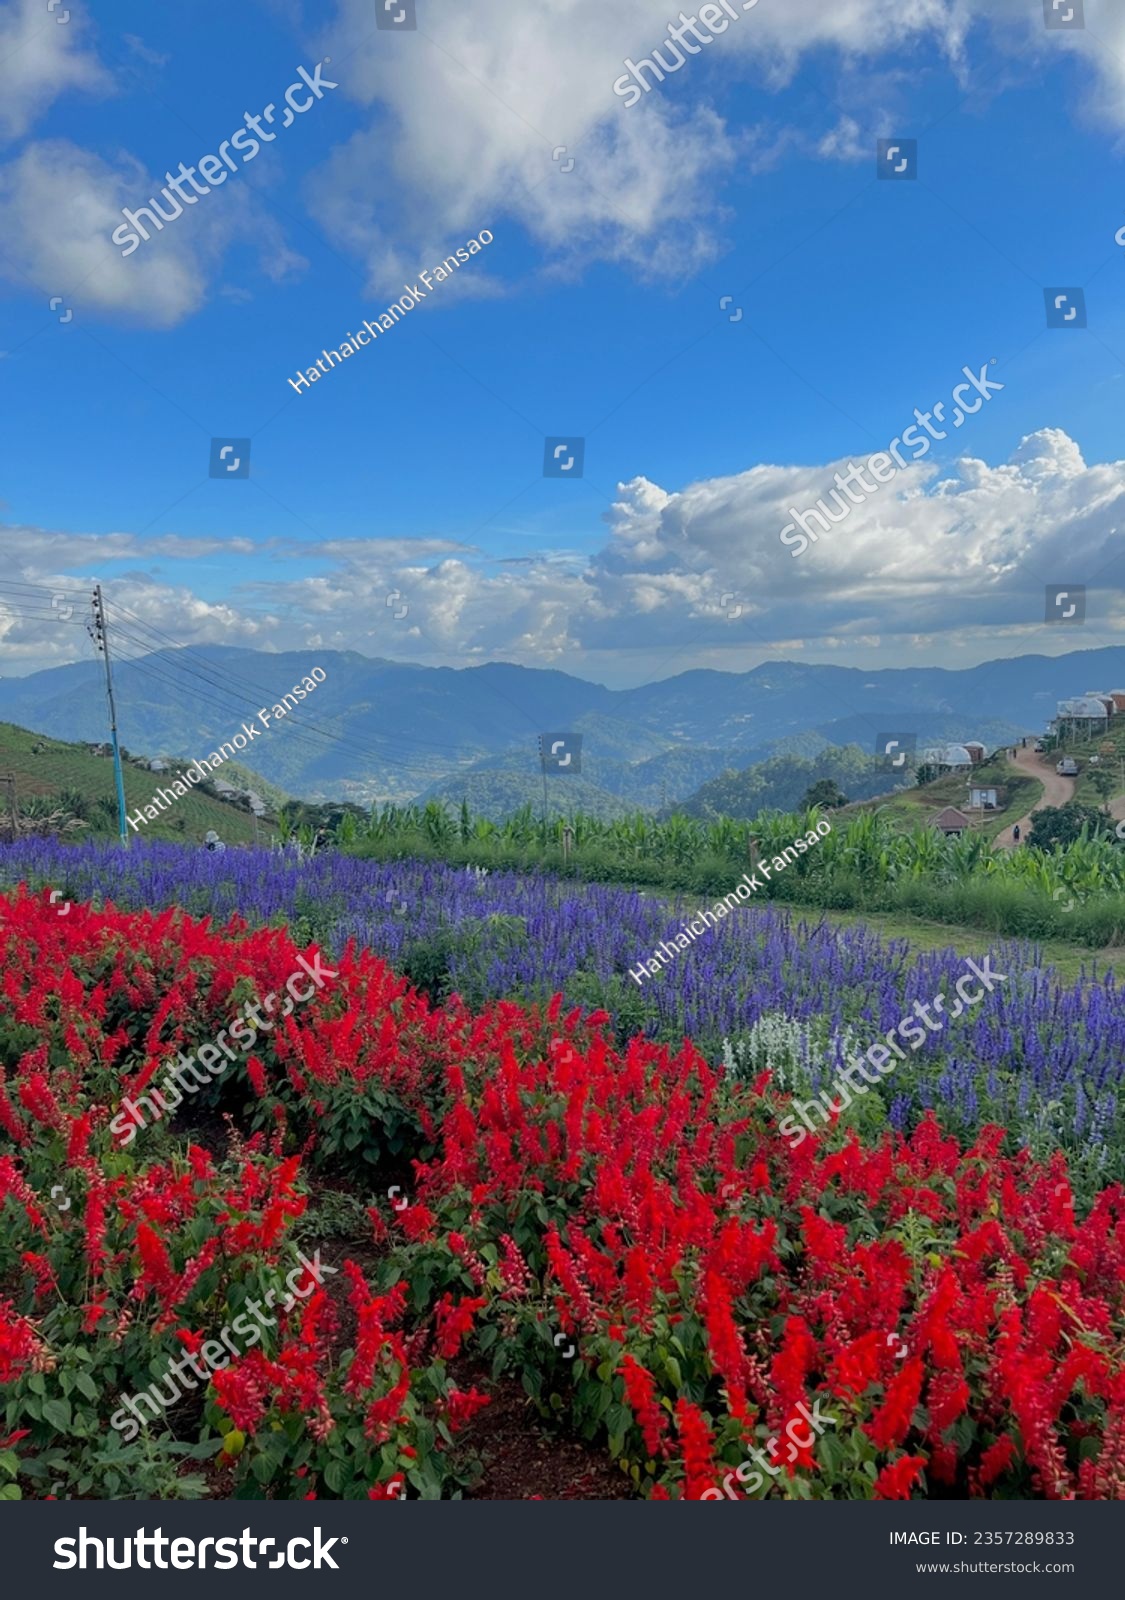 Flower garden on the mountain during winter at Mon Jam Chiang Mai, Thailand #2357289833